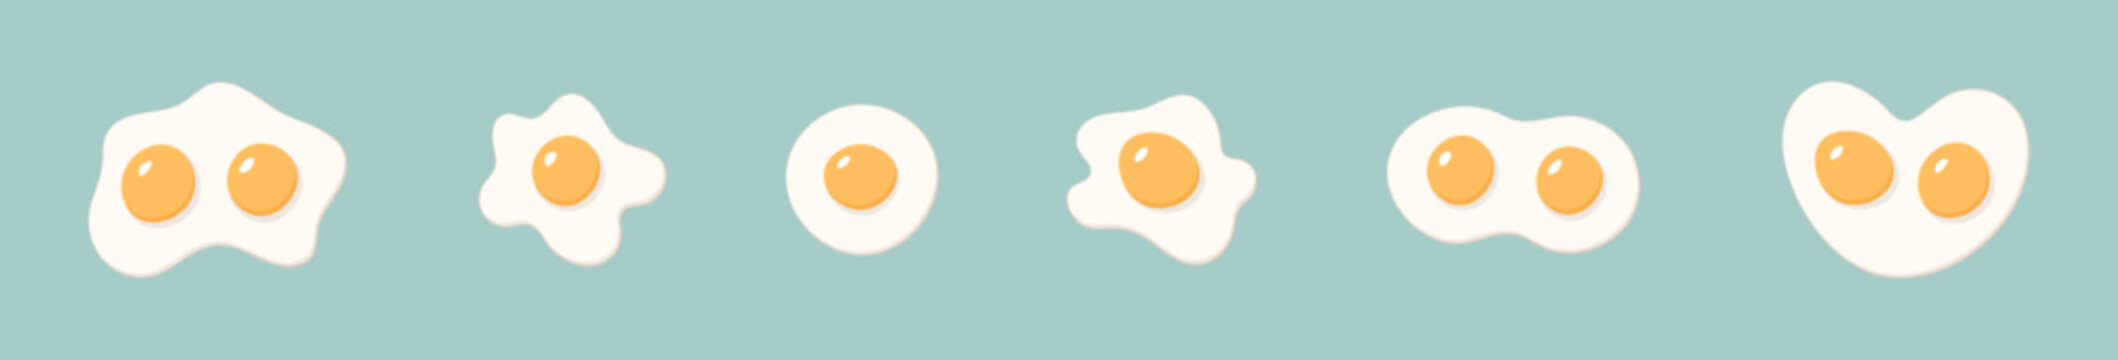 Set of fried eggs in different shapes. Isolated vector illustration.